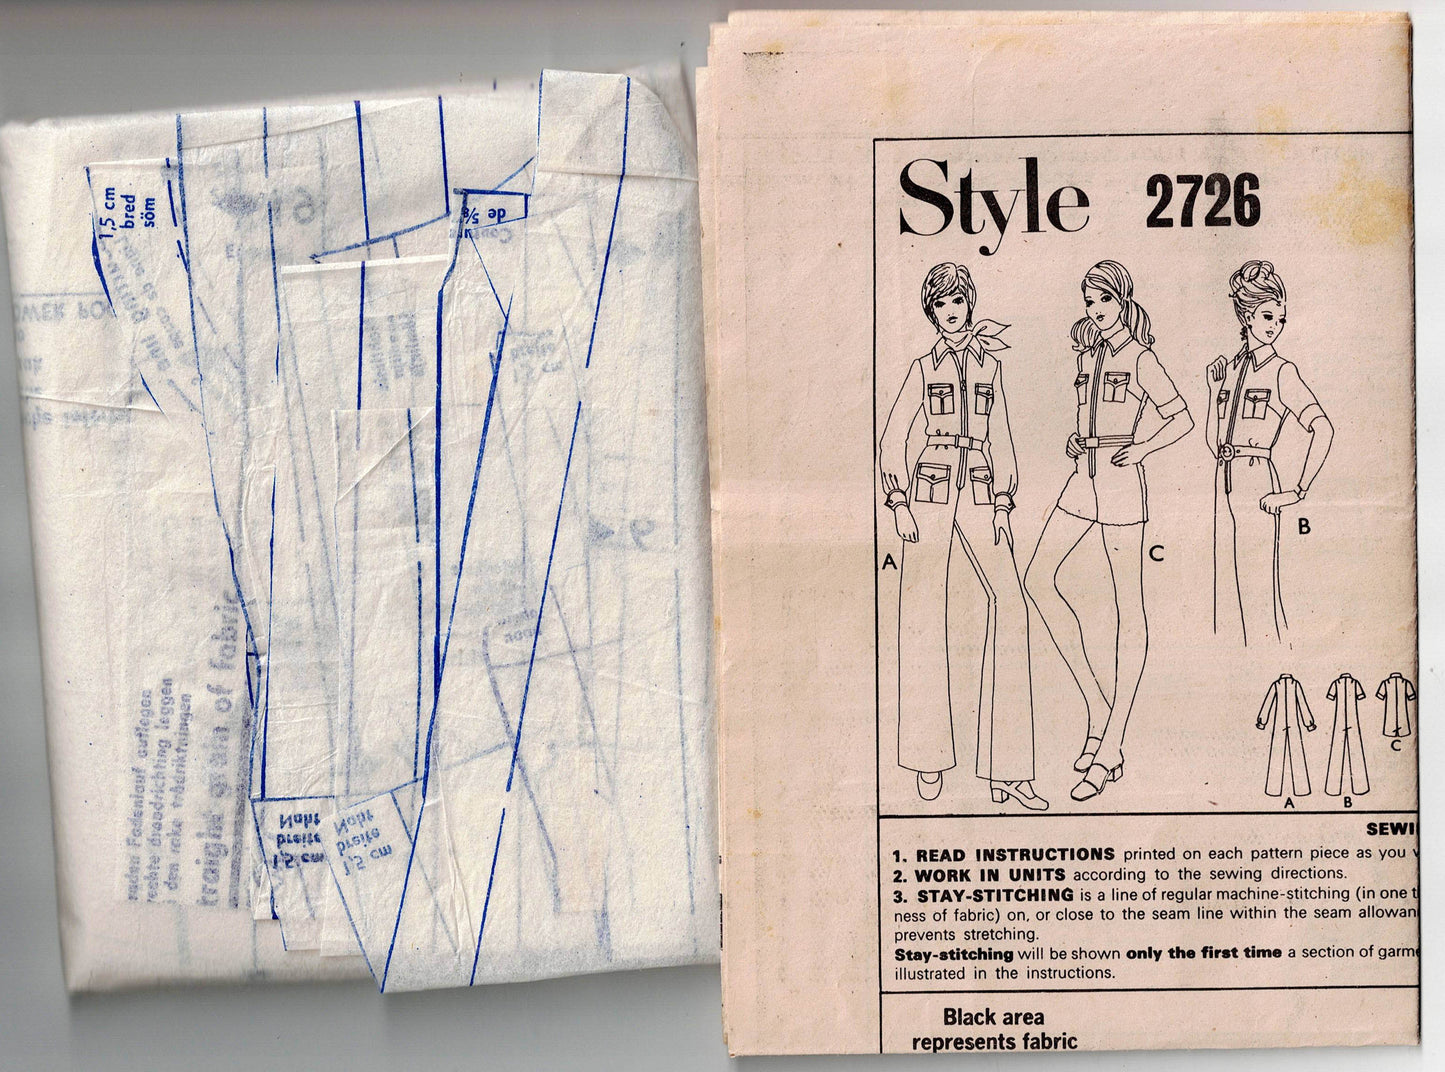 Style 2726 Young Junior Teens Jumpsuit or Playsuit with Pockets 1970s Vintage Sewing Pattern Size 13/14 Bust 323.5 inches